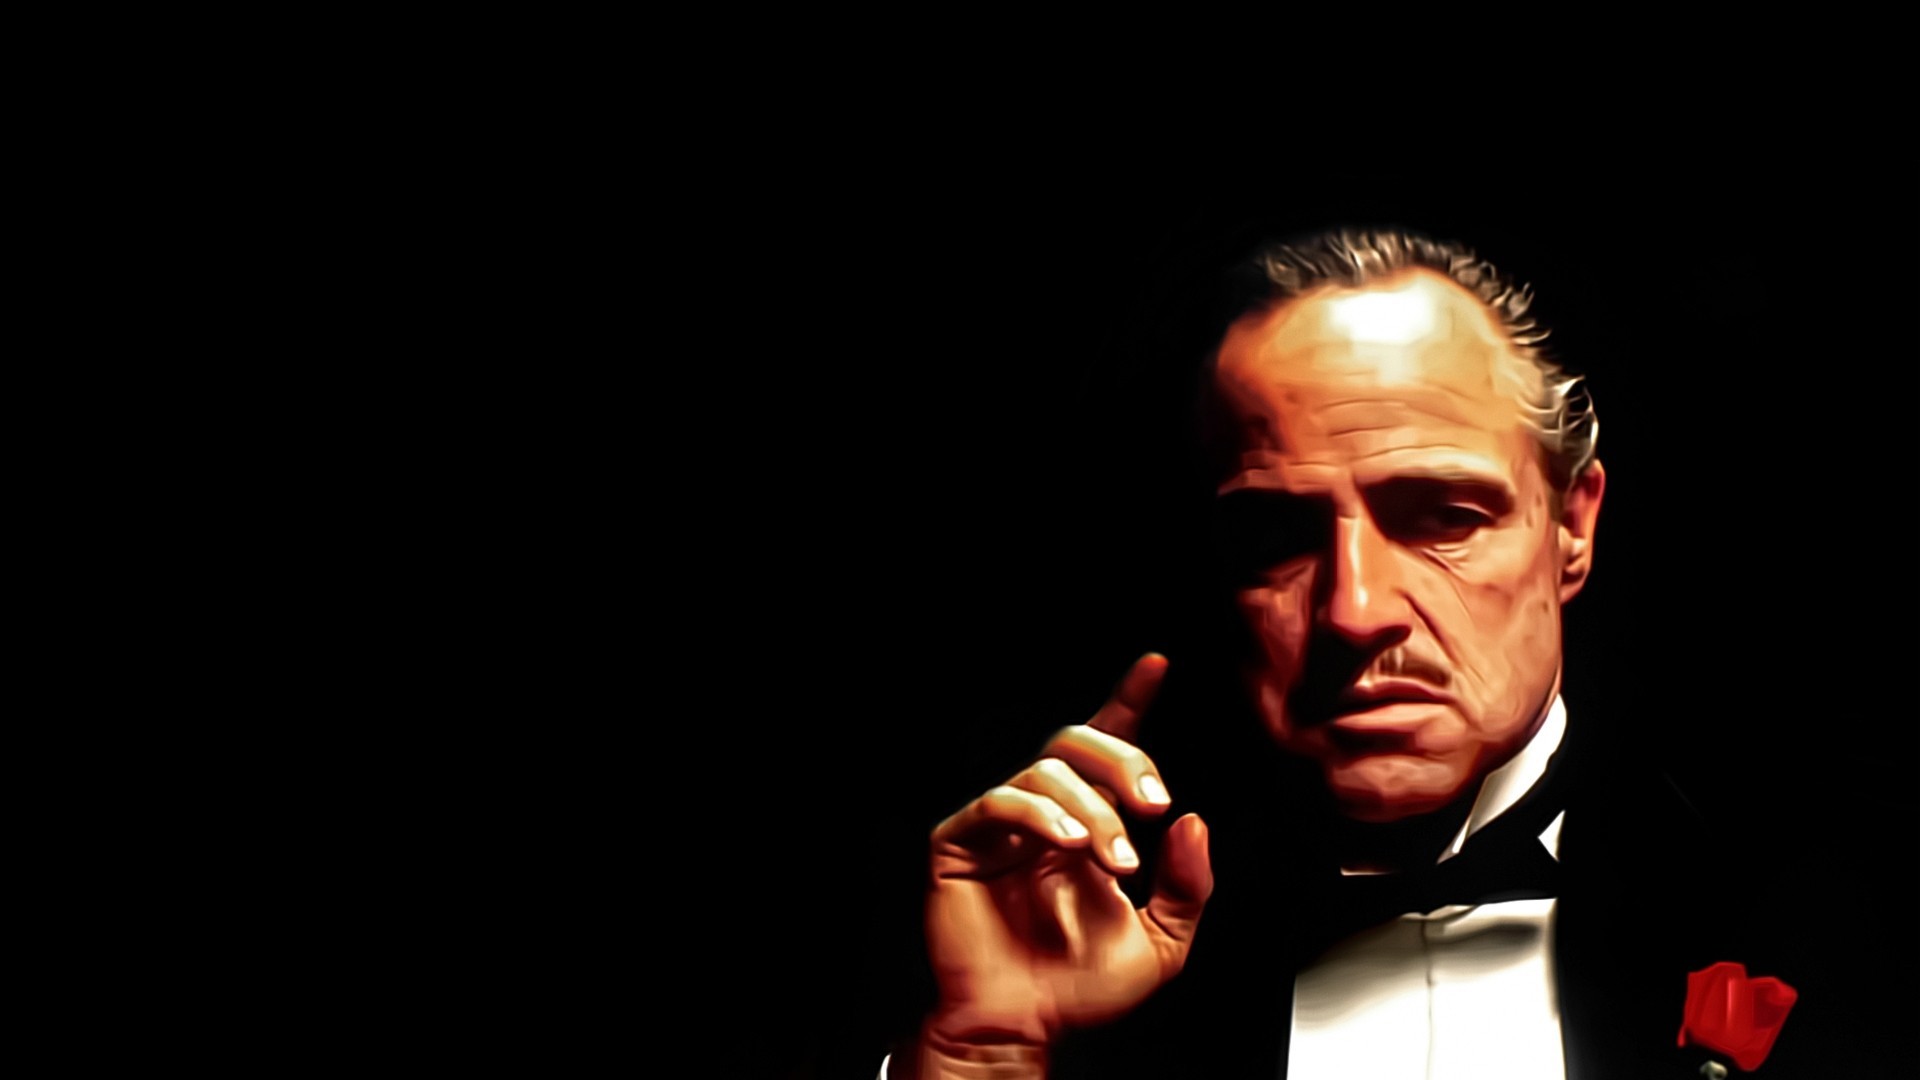 Don Vito Corleone Godfather pictures and wallpaper for desktop